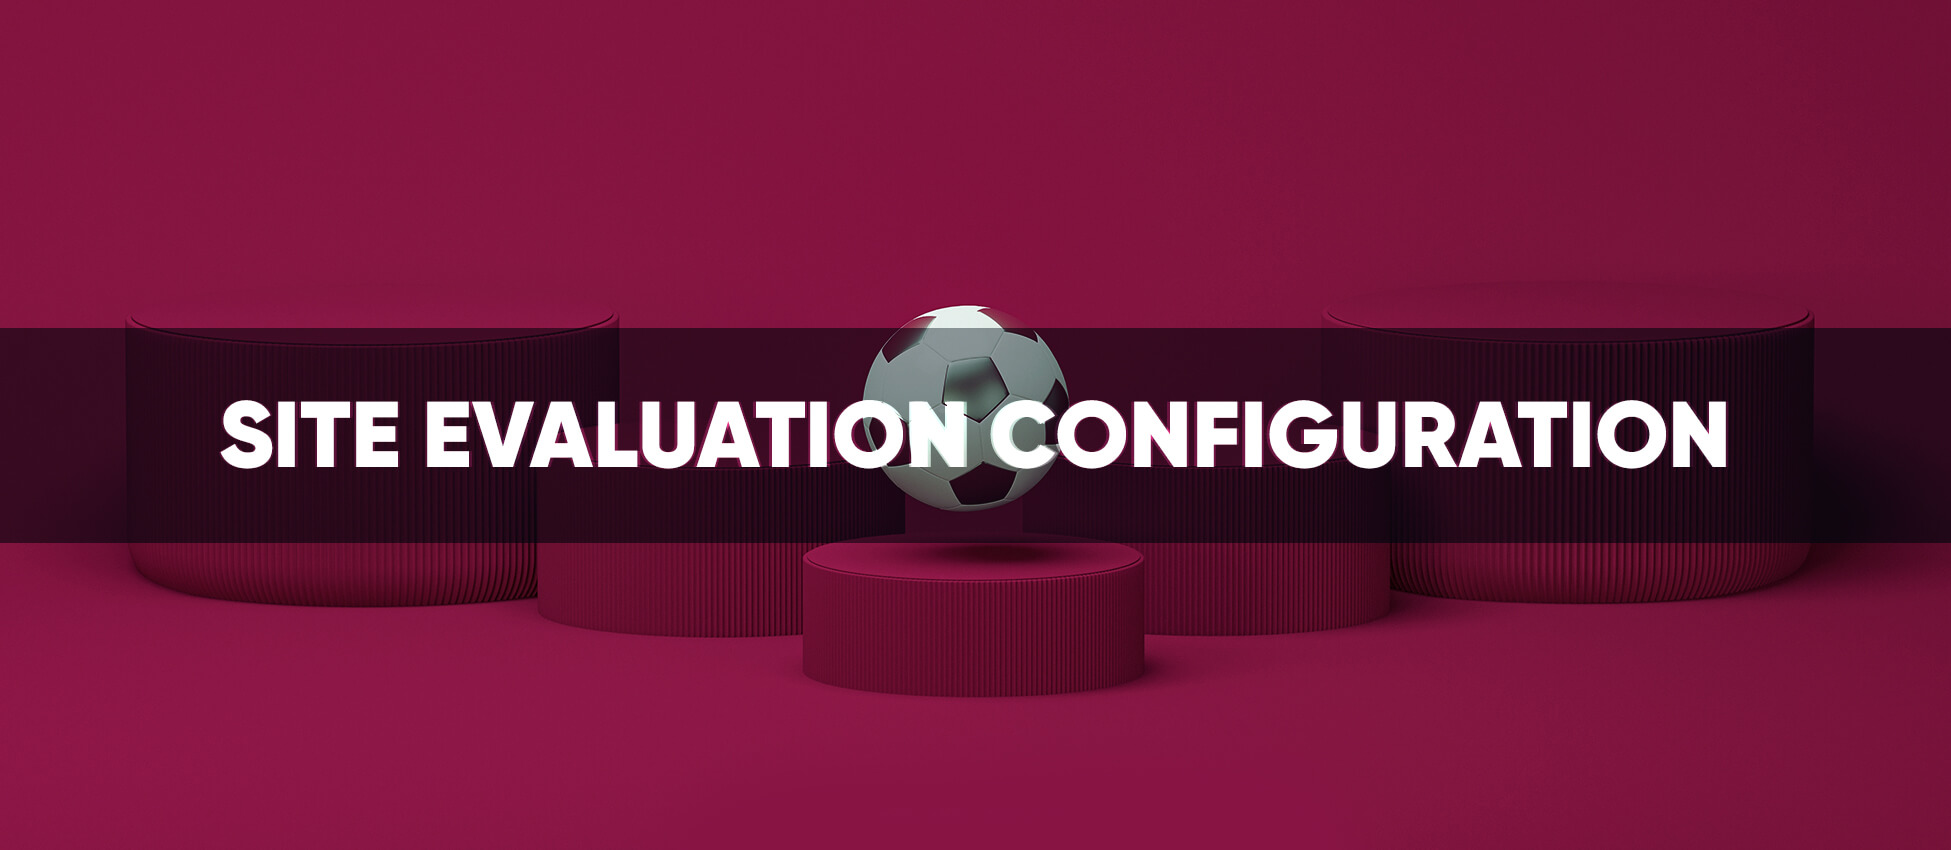 Online football betting site evaluation configuration